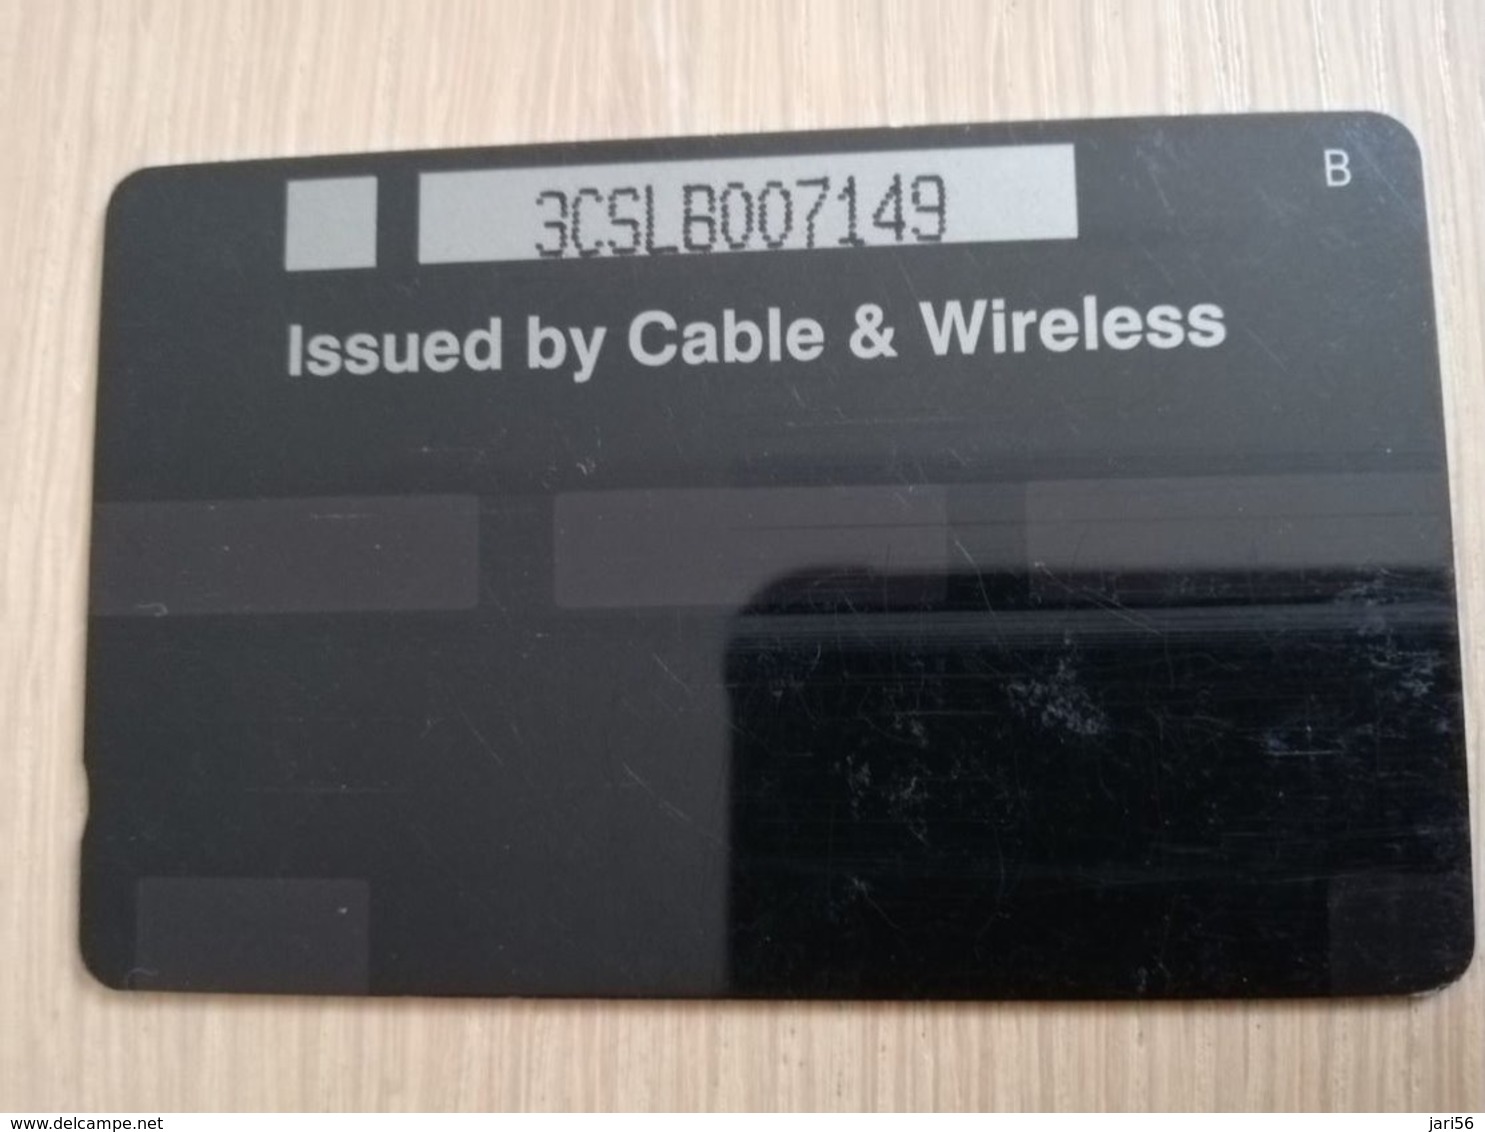 ST LUCIA    $ 20  CABLE & WIRELESS  STL-3B   3CSLB  Fine Used Card ** 2384** - St. Lucia